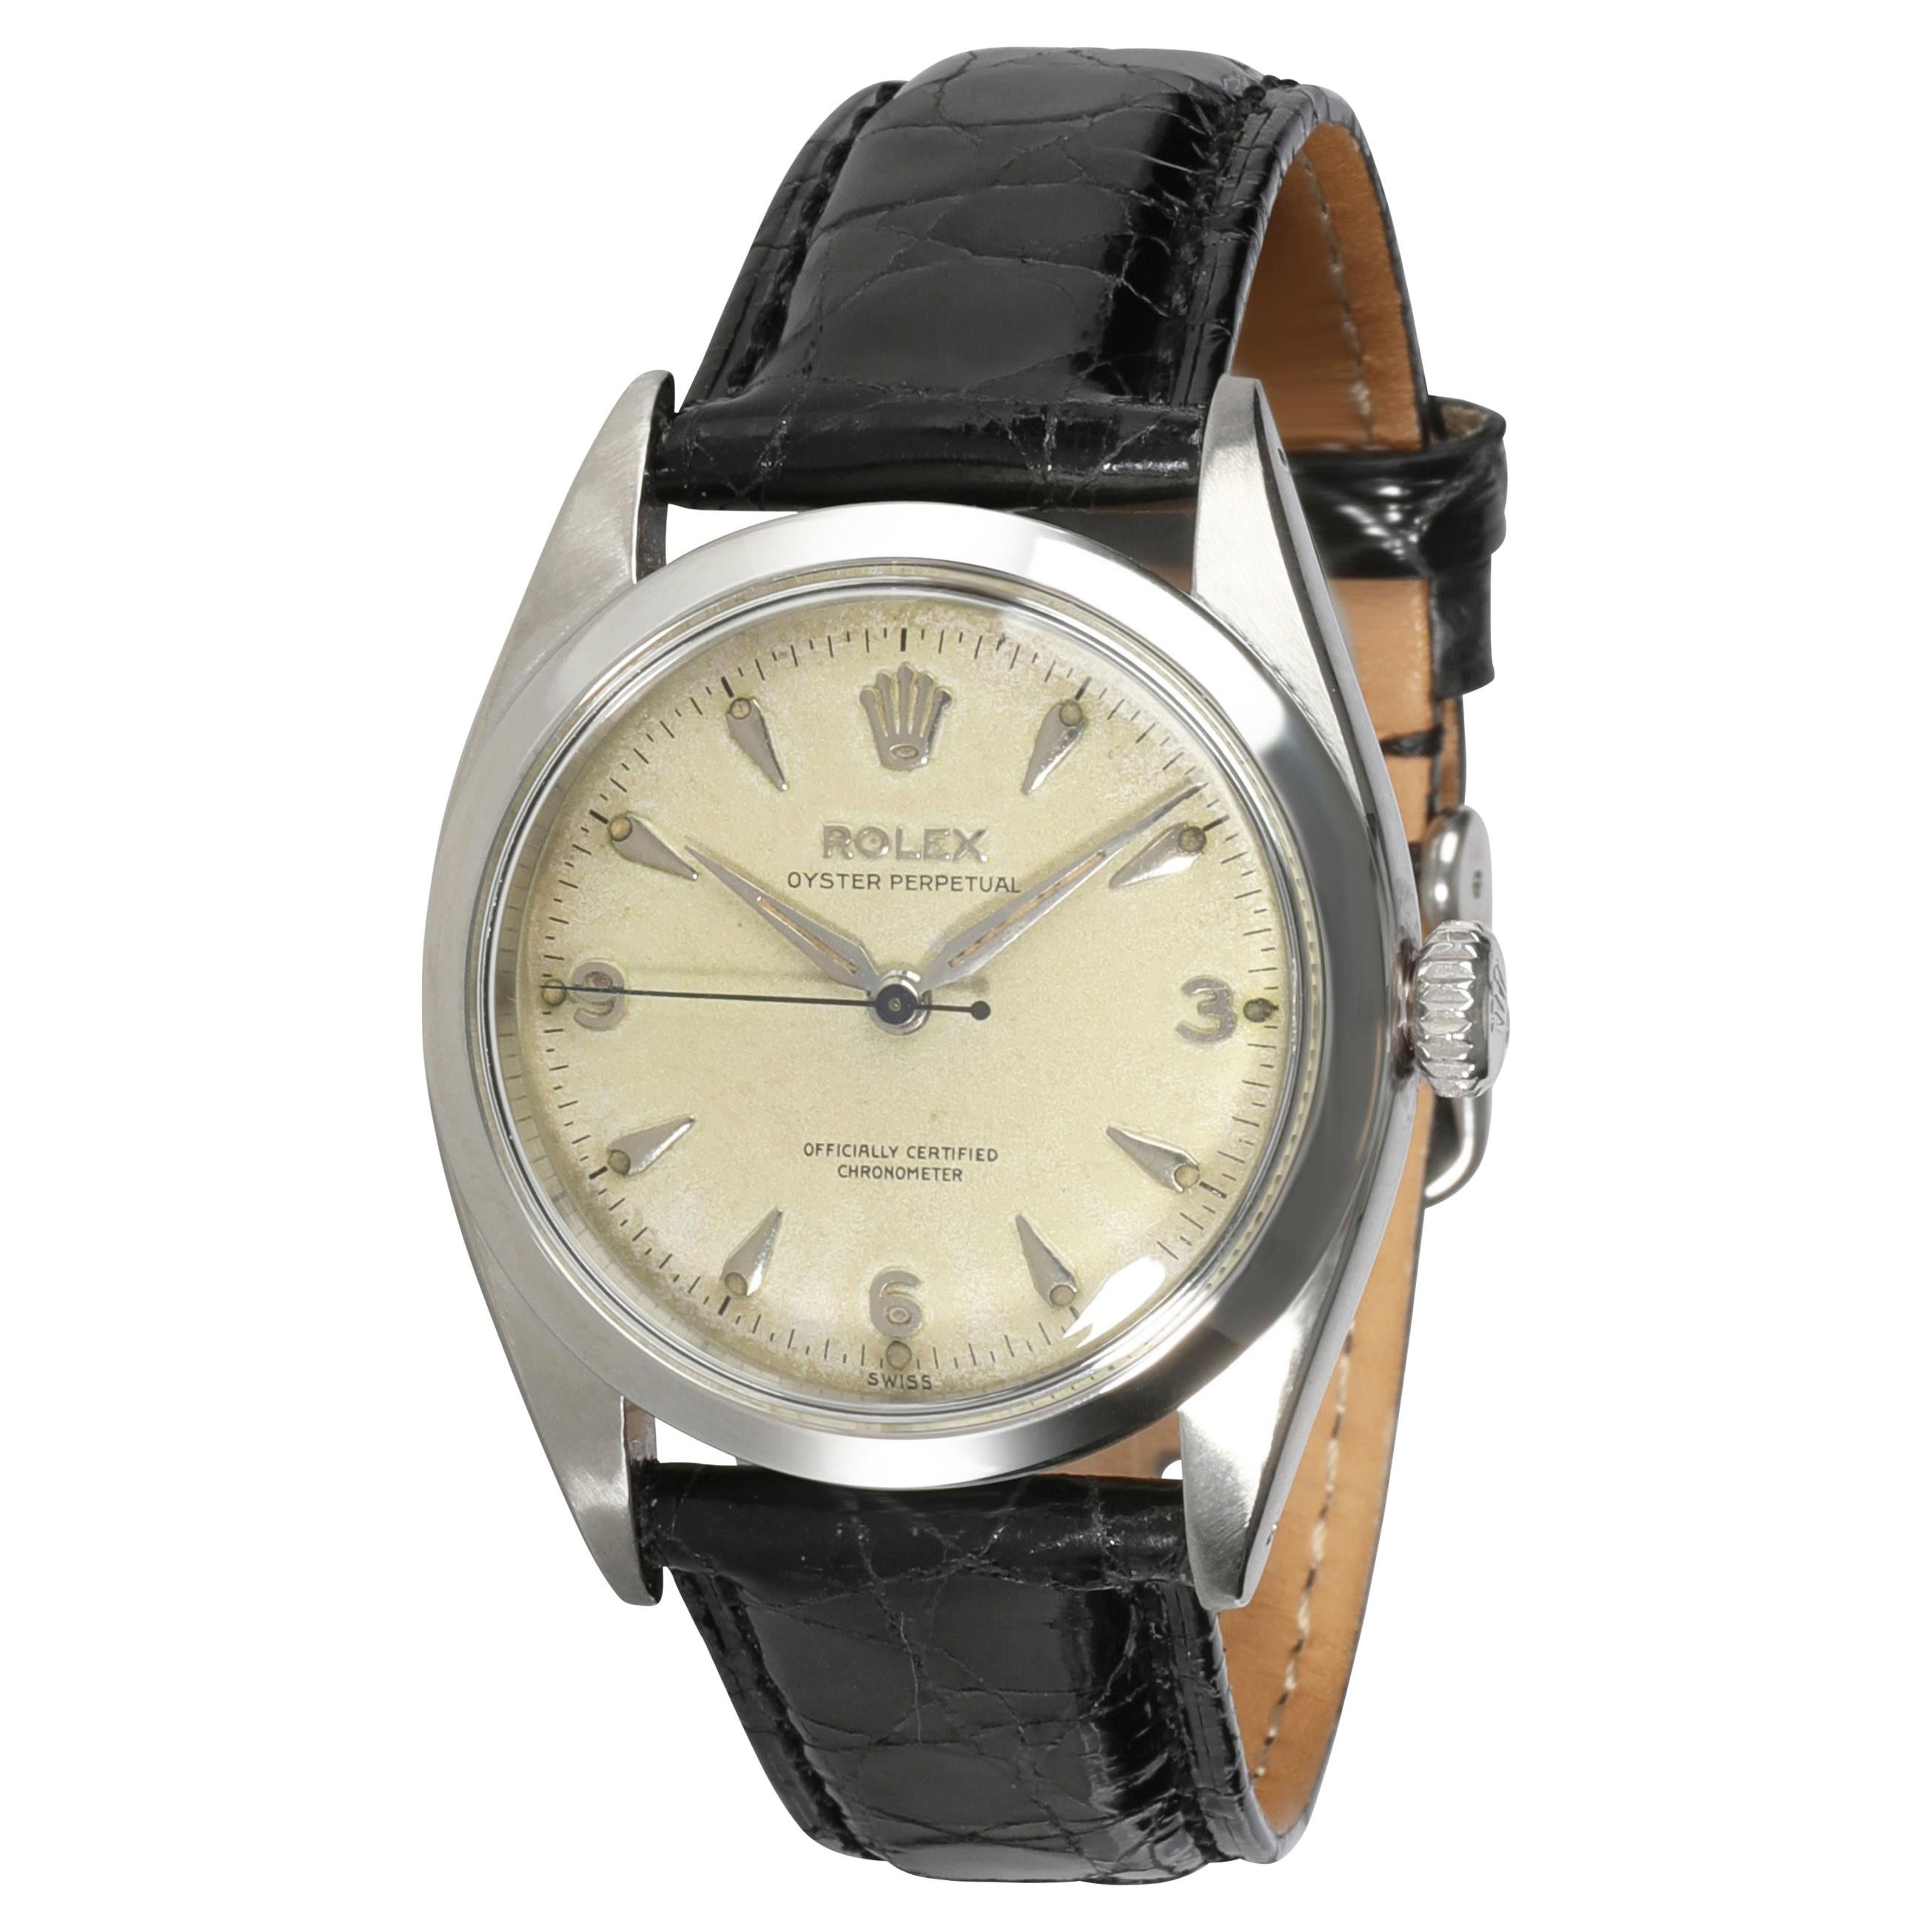 Rolex Oyster Perpetual 6580 Men's Watch in Stainless Steel